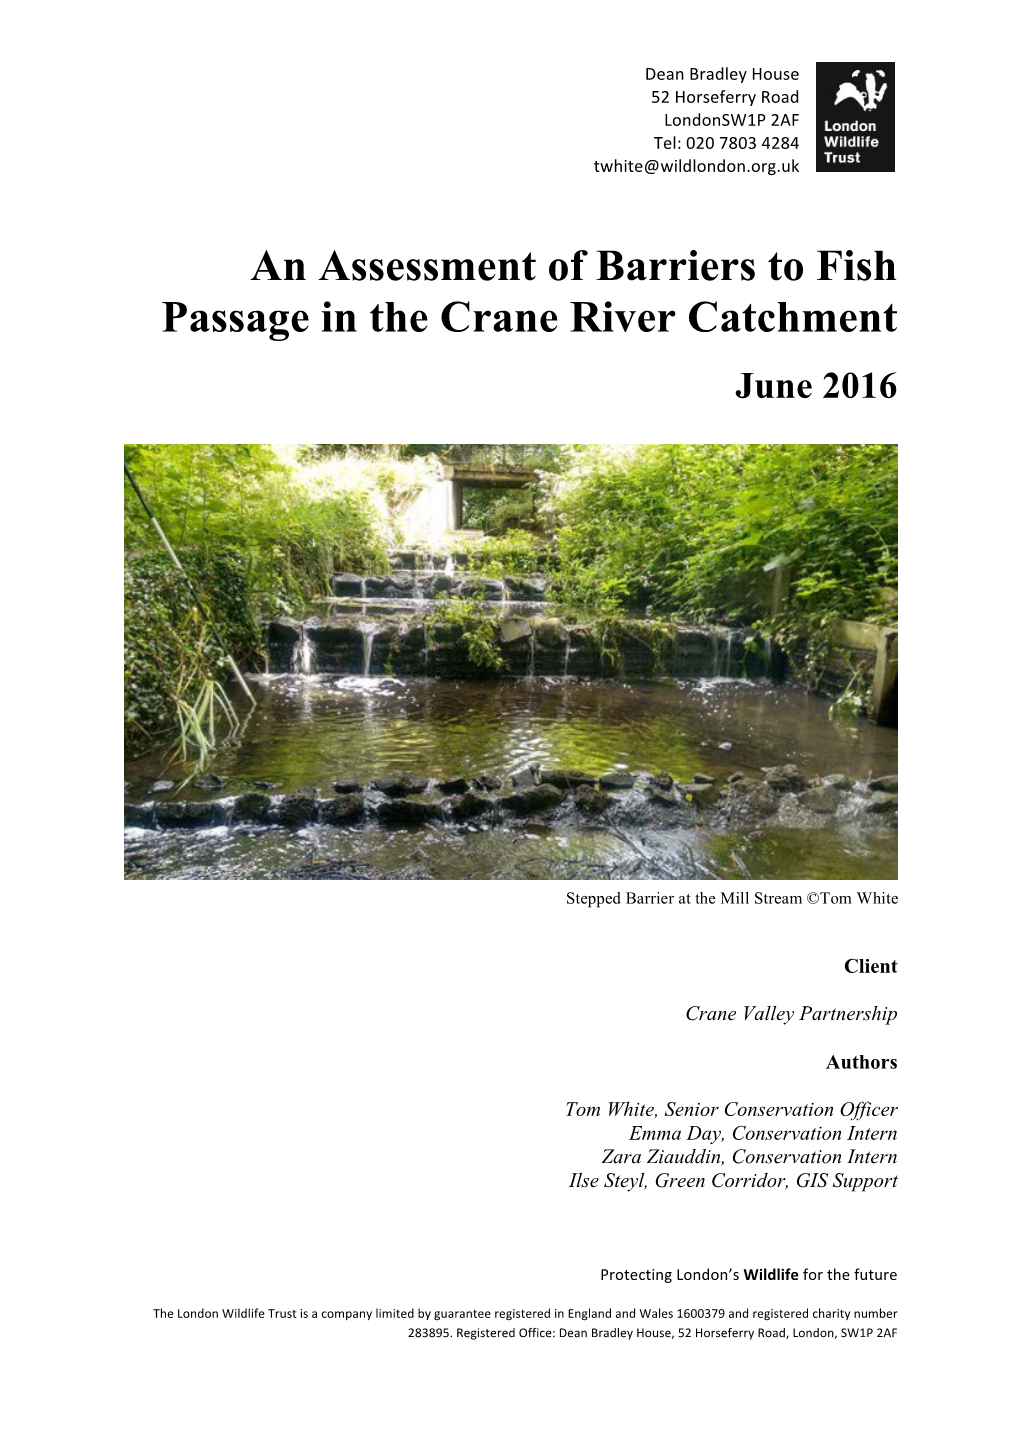 An Assessment of Barriers to Fish Passage in the Crane River Catchment